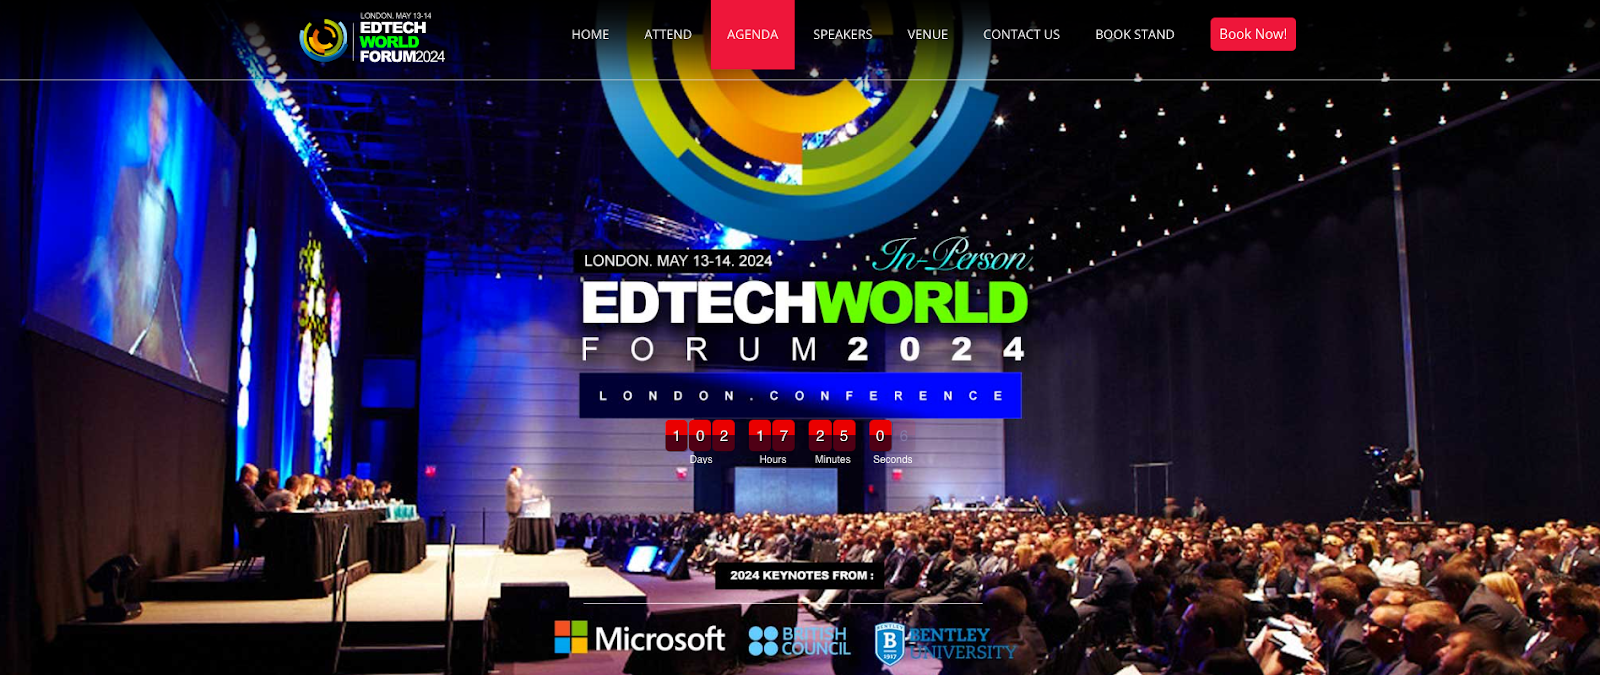 EdTech World Forum 2024 has a full program of speeches from leading industry professonals.